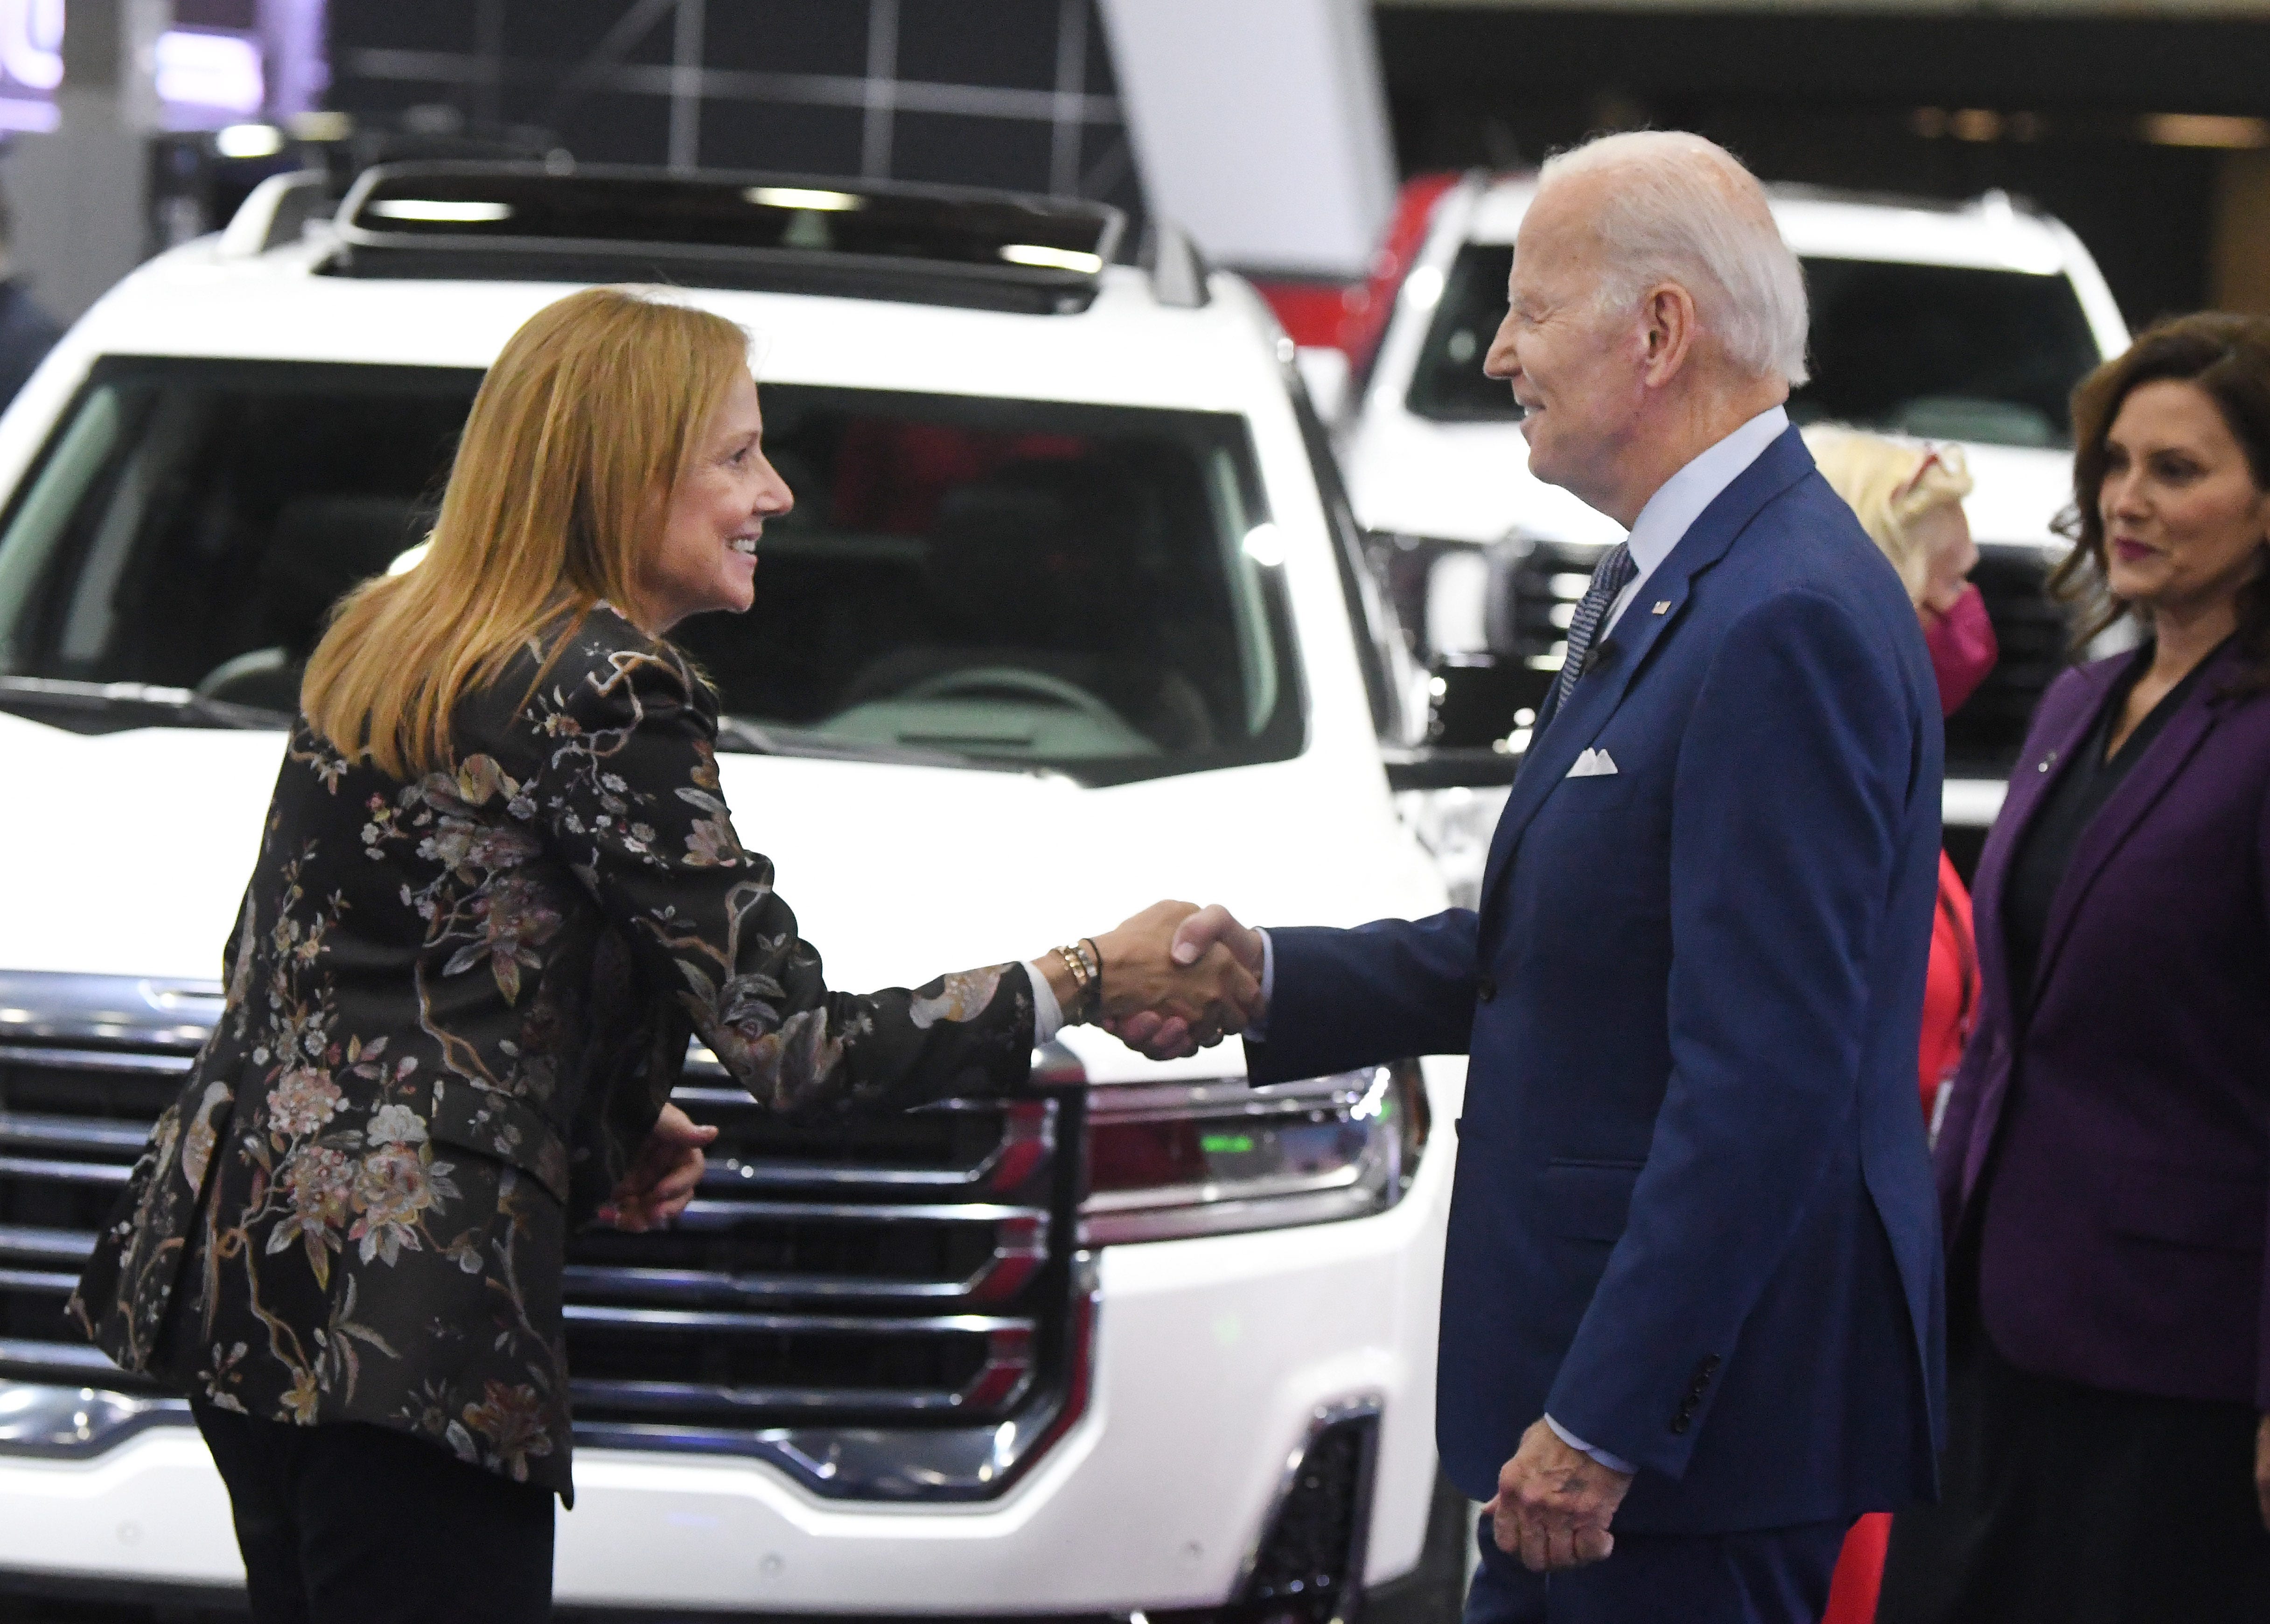 General Motors chair and chief executive officer Mary Barra greets President Joe Biden at the GM display during a tour of the 2022 North American International Auto Show in Detroit, Michigan on September 14, 2022.  =